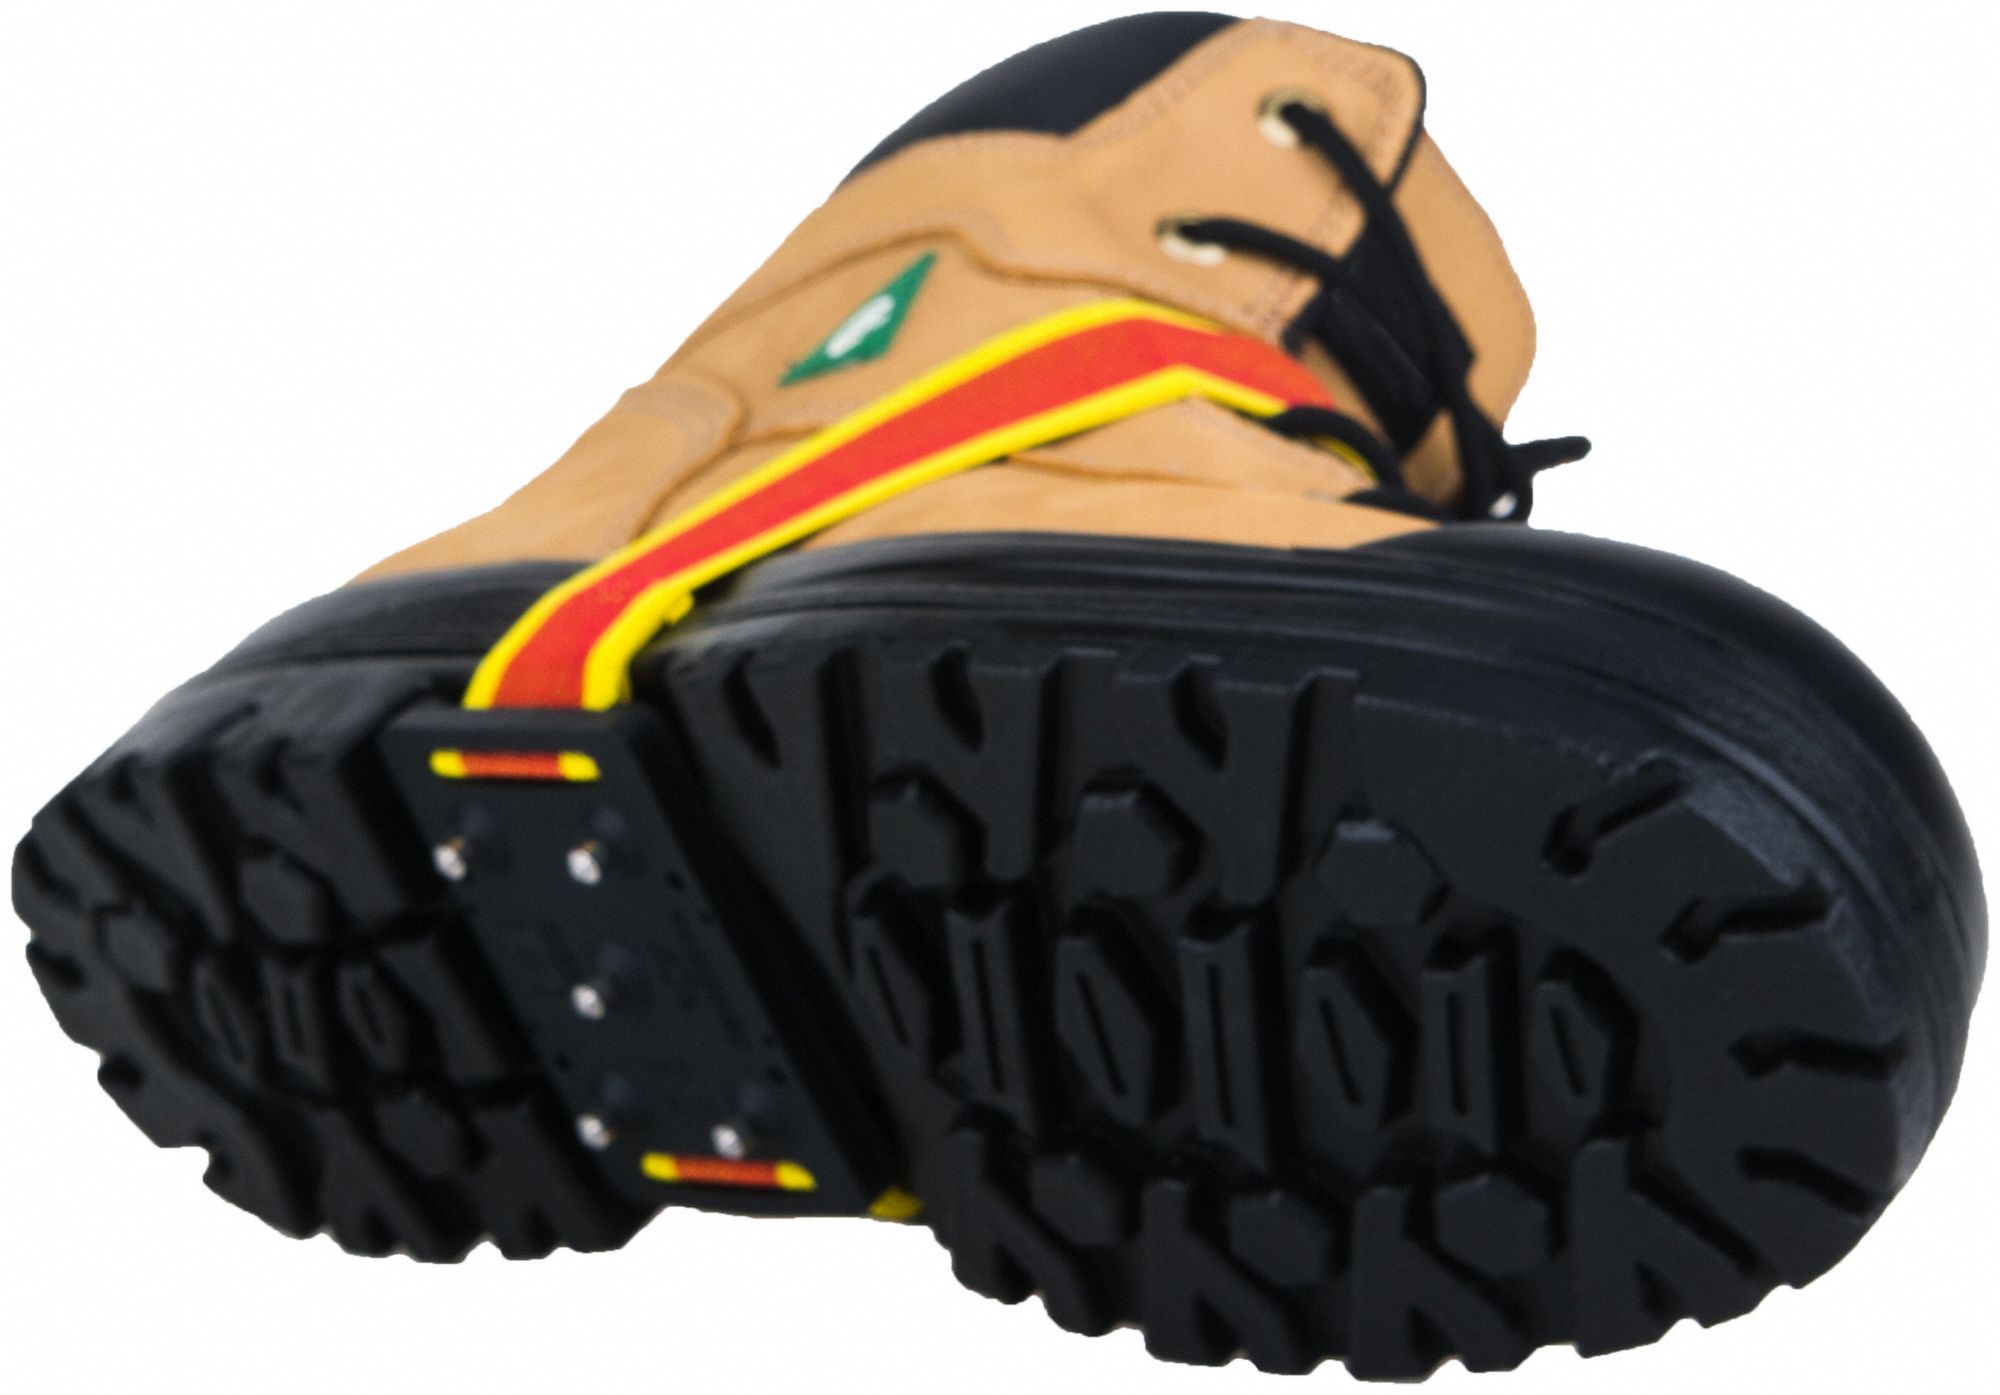 Traction Device: Mid-Sole Footwear Coverage, Rubber, Stud, 3 in L x 2-1/8 in W x 5/8 in H, 1 PR